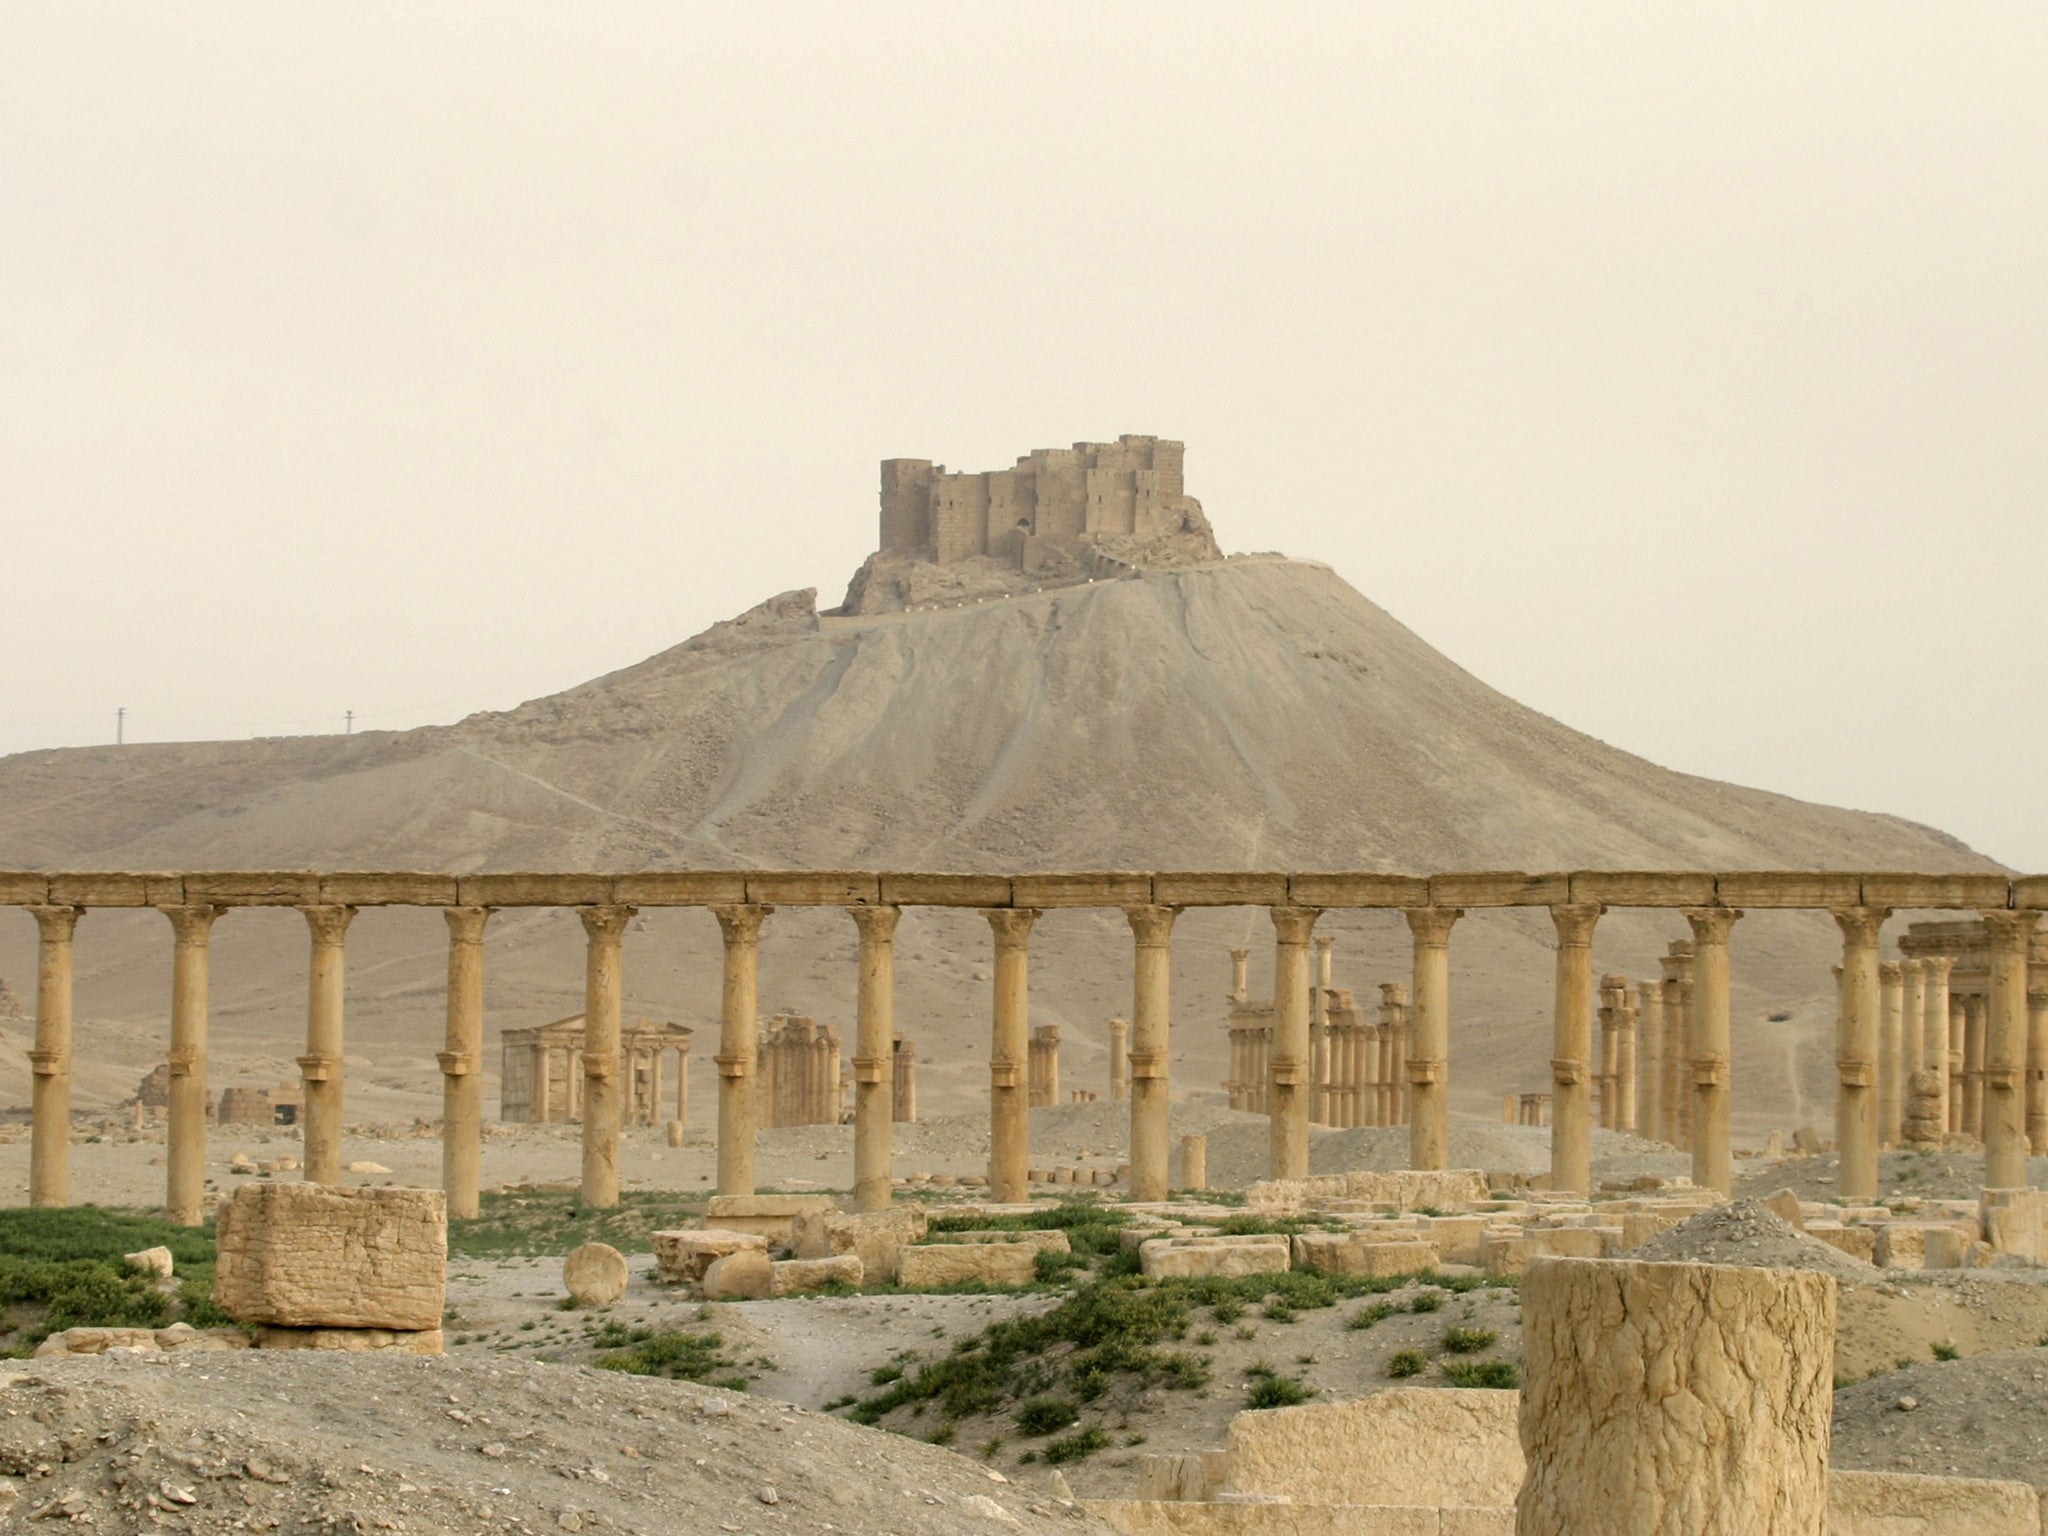 Al-Asaad had worked at Palmyra for more than 50 years